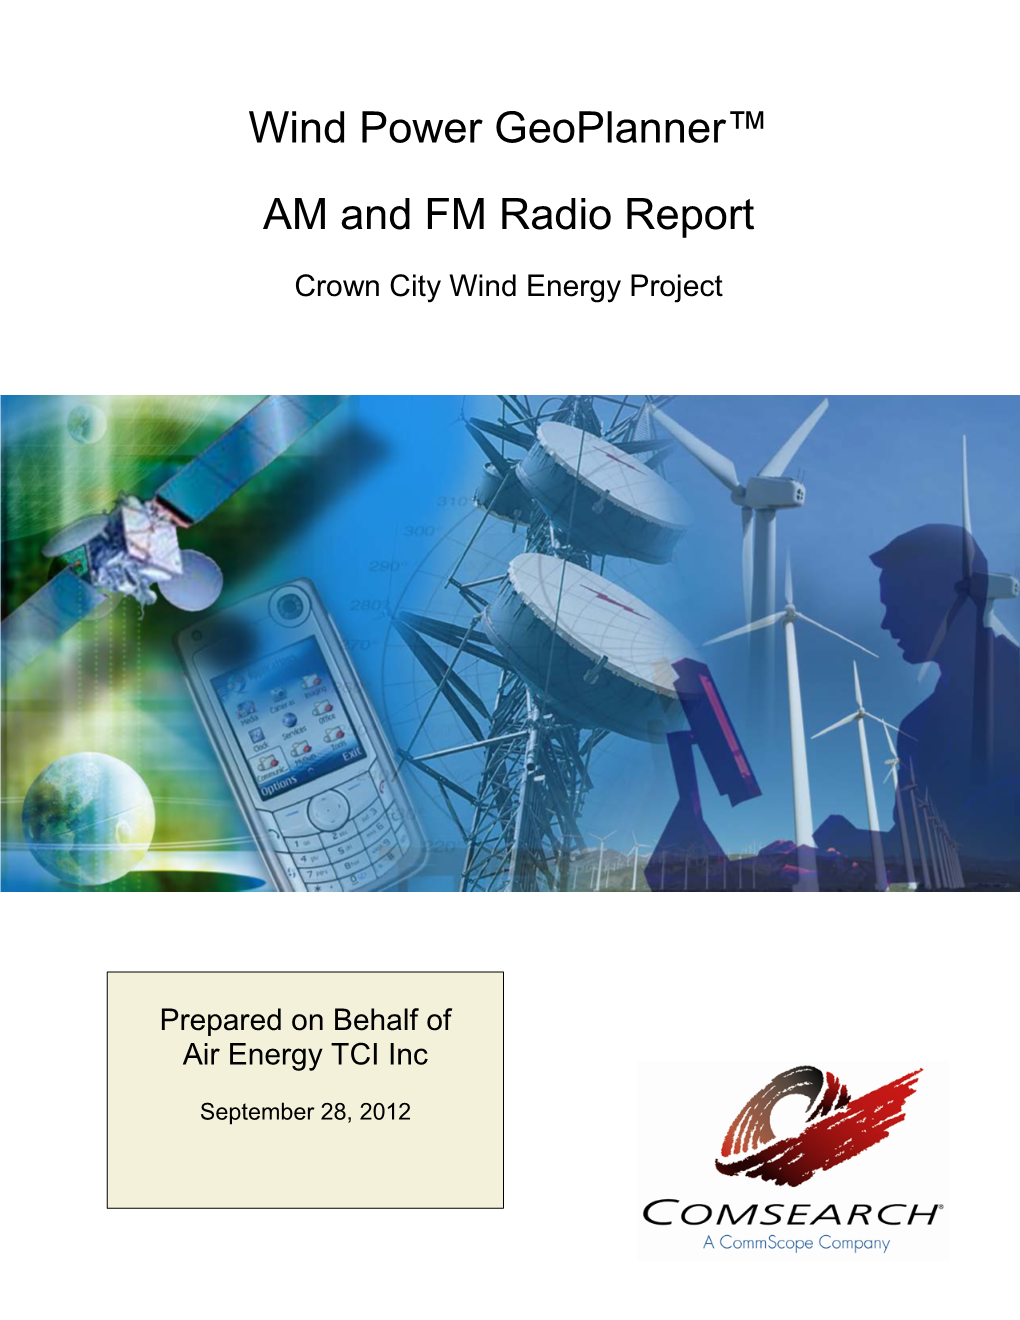 Wind Power Geoplanner™ AM and FM Radio Report Crown City Wind Energy Project